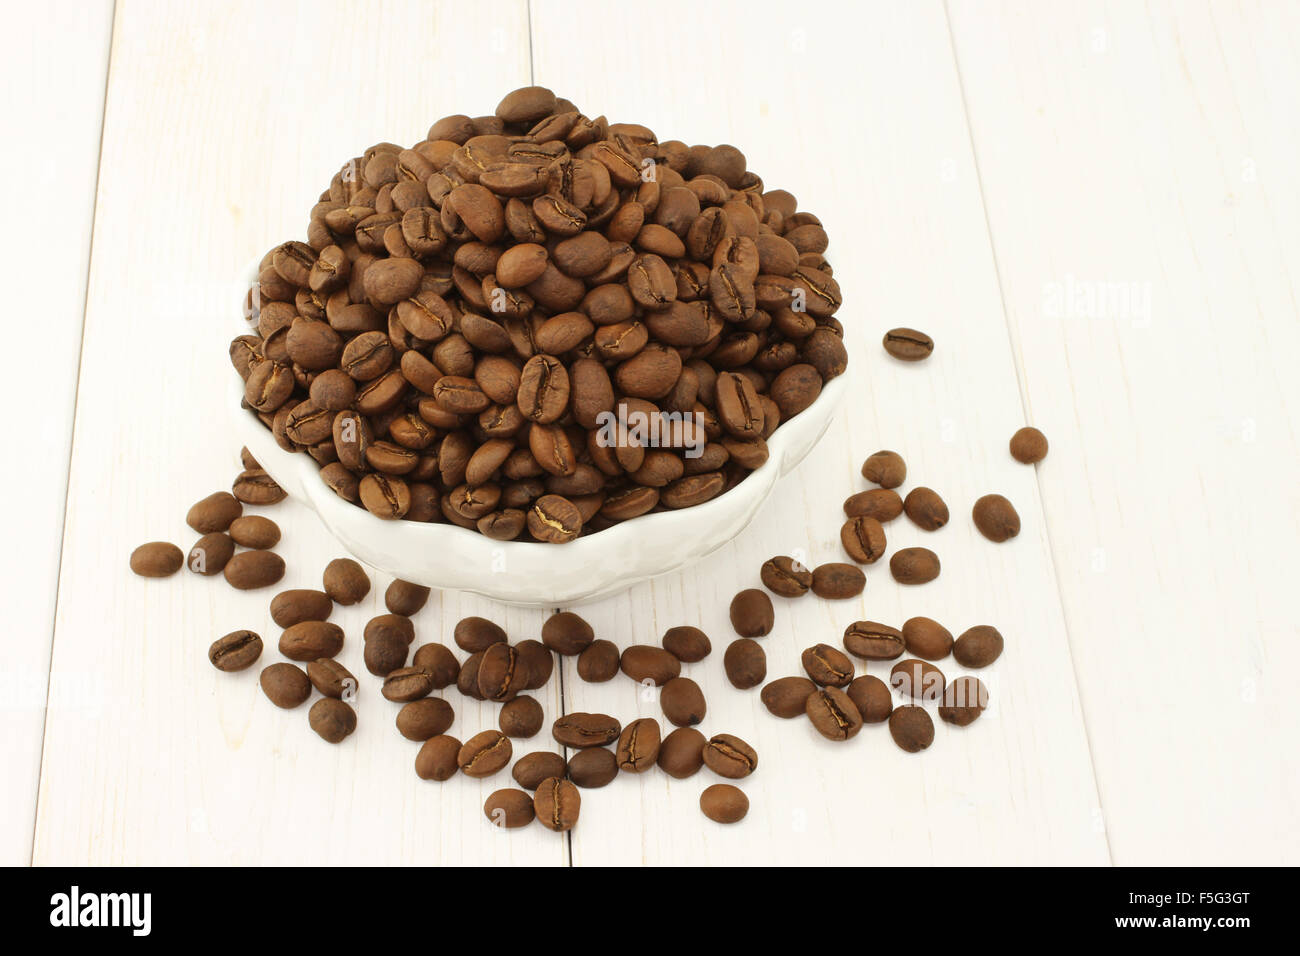 Roasted coffee beans in white bowl and on white wooden background Stock Photo